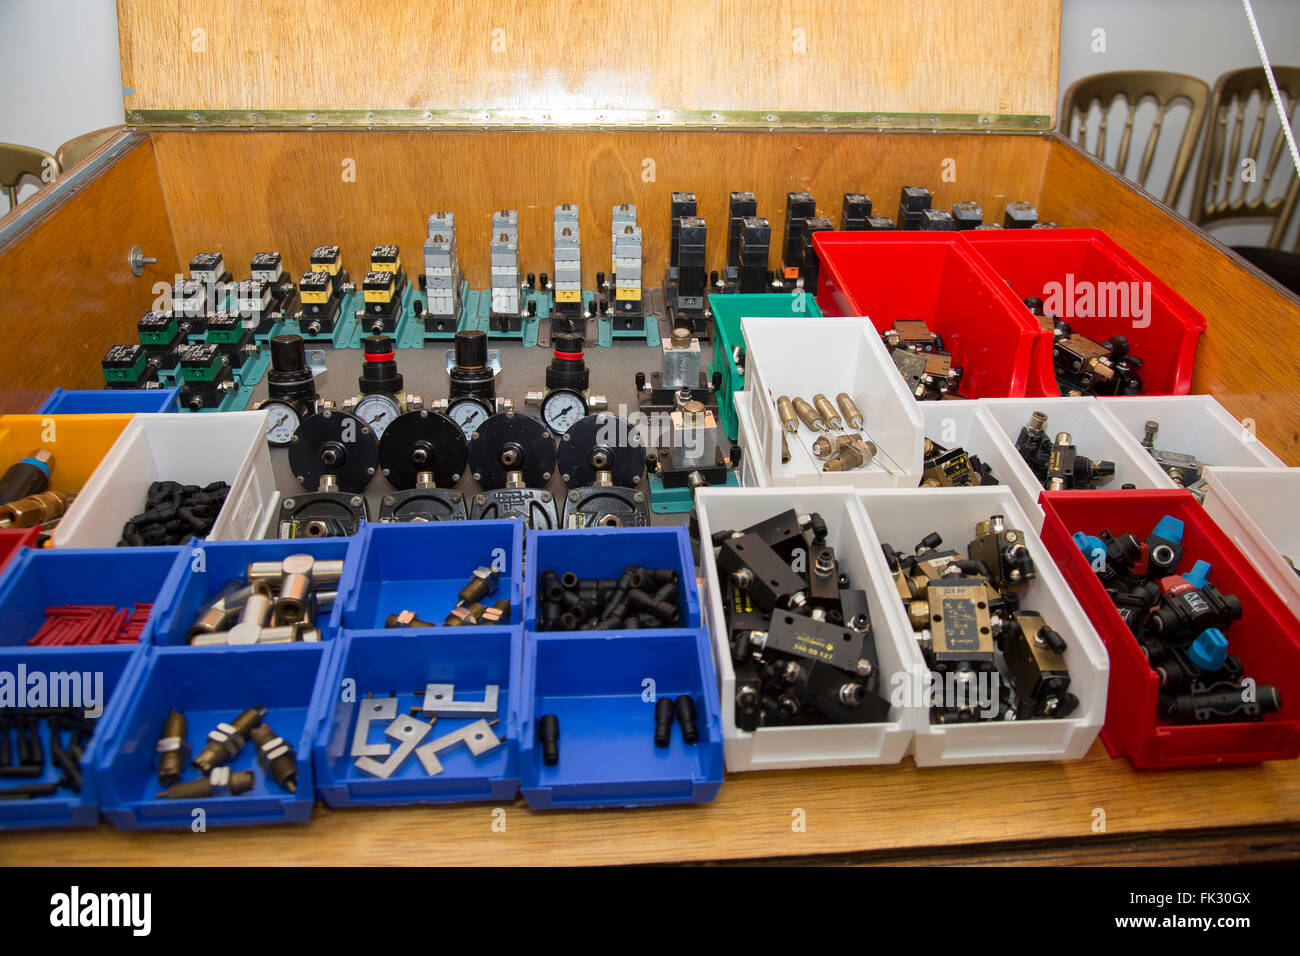 Electrical and engineering components in storage boxes. Stock Photo